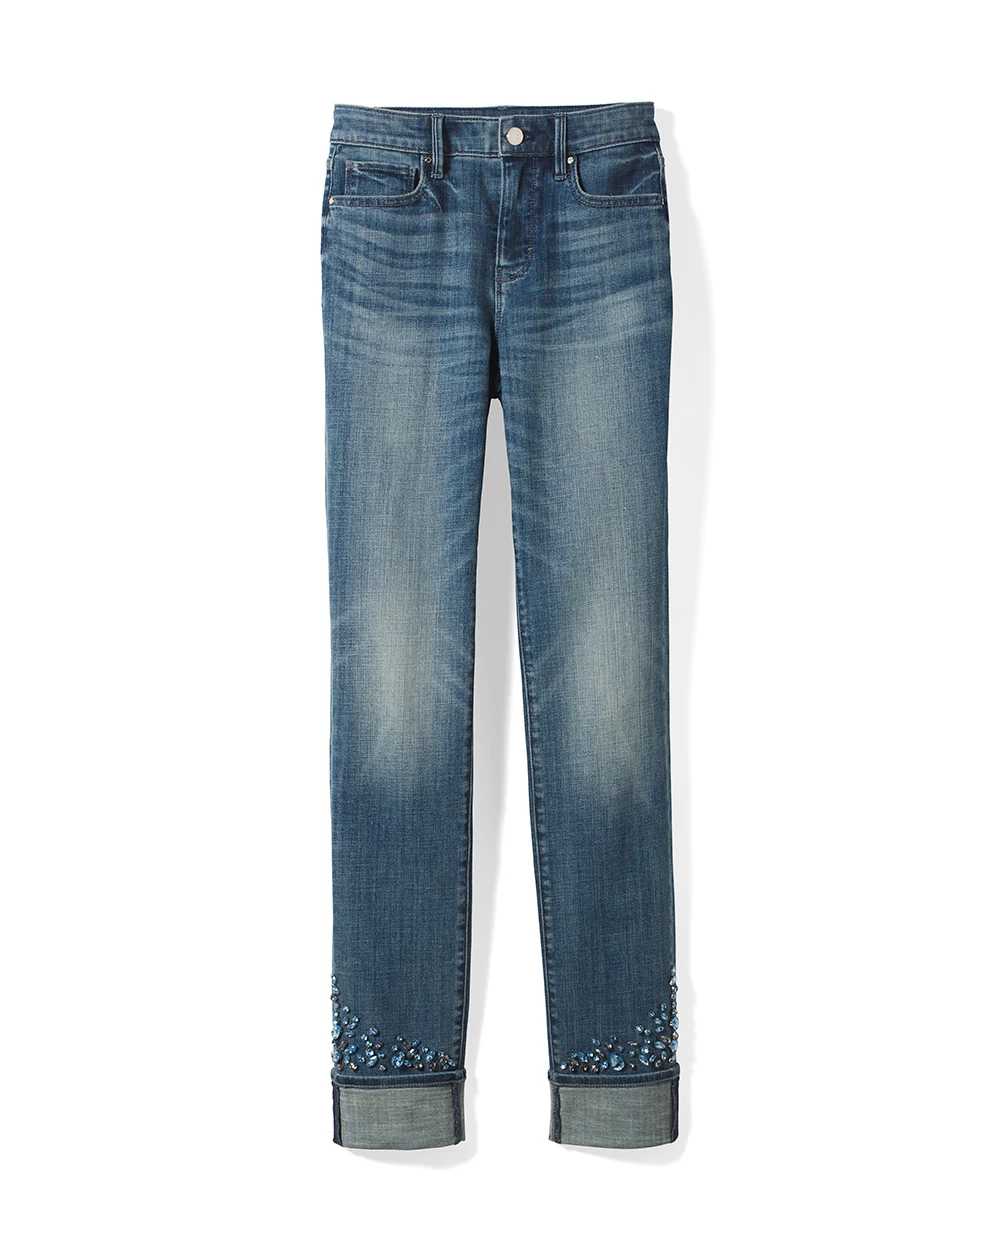 Petite High-Rise Everyday Soft Denim  Crystal Cuff Slim Jeans click to view larger image.